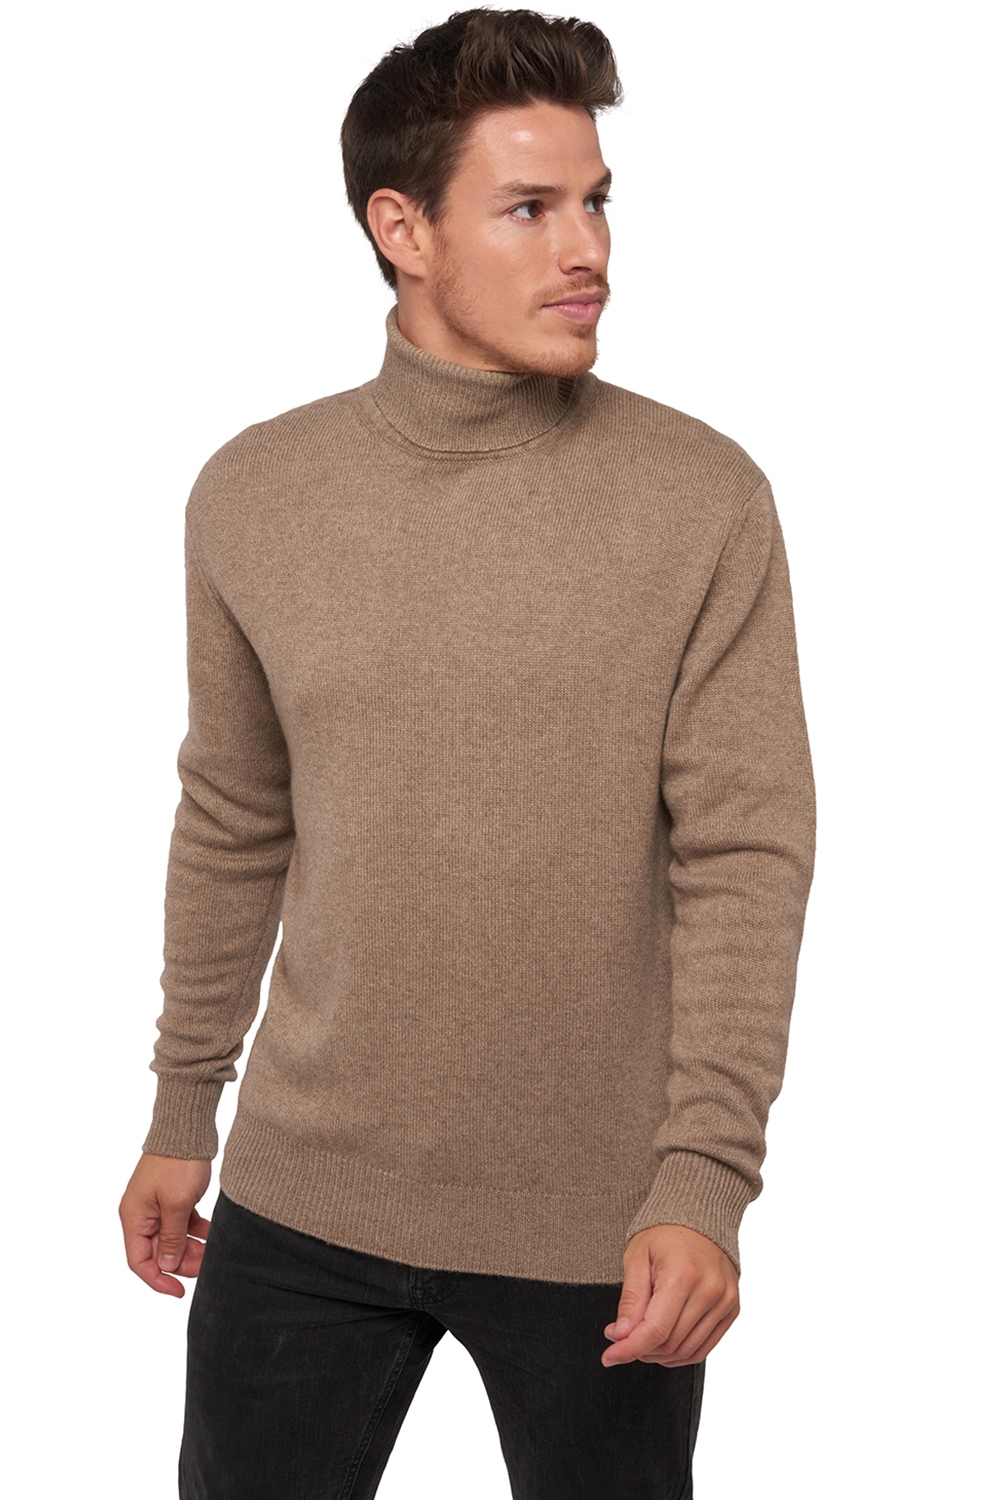 Cachemire pull homme col roule edgar 4f natural brown s